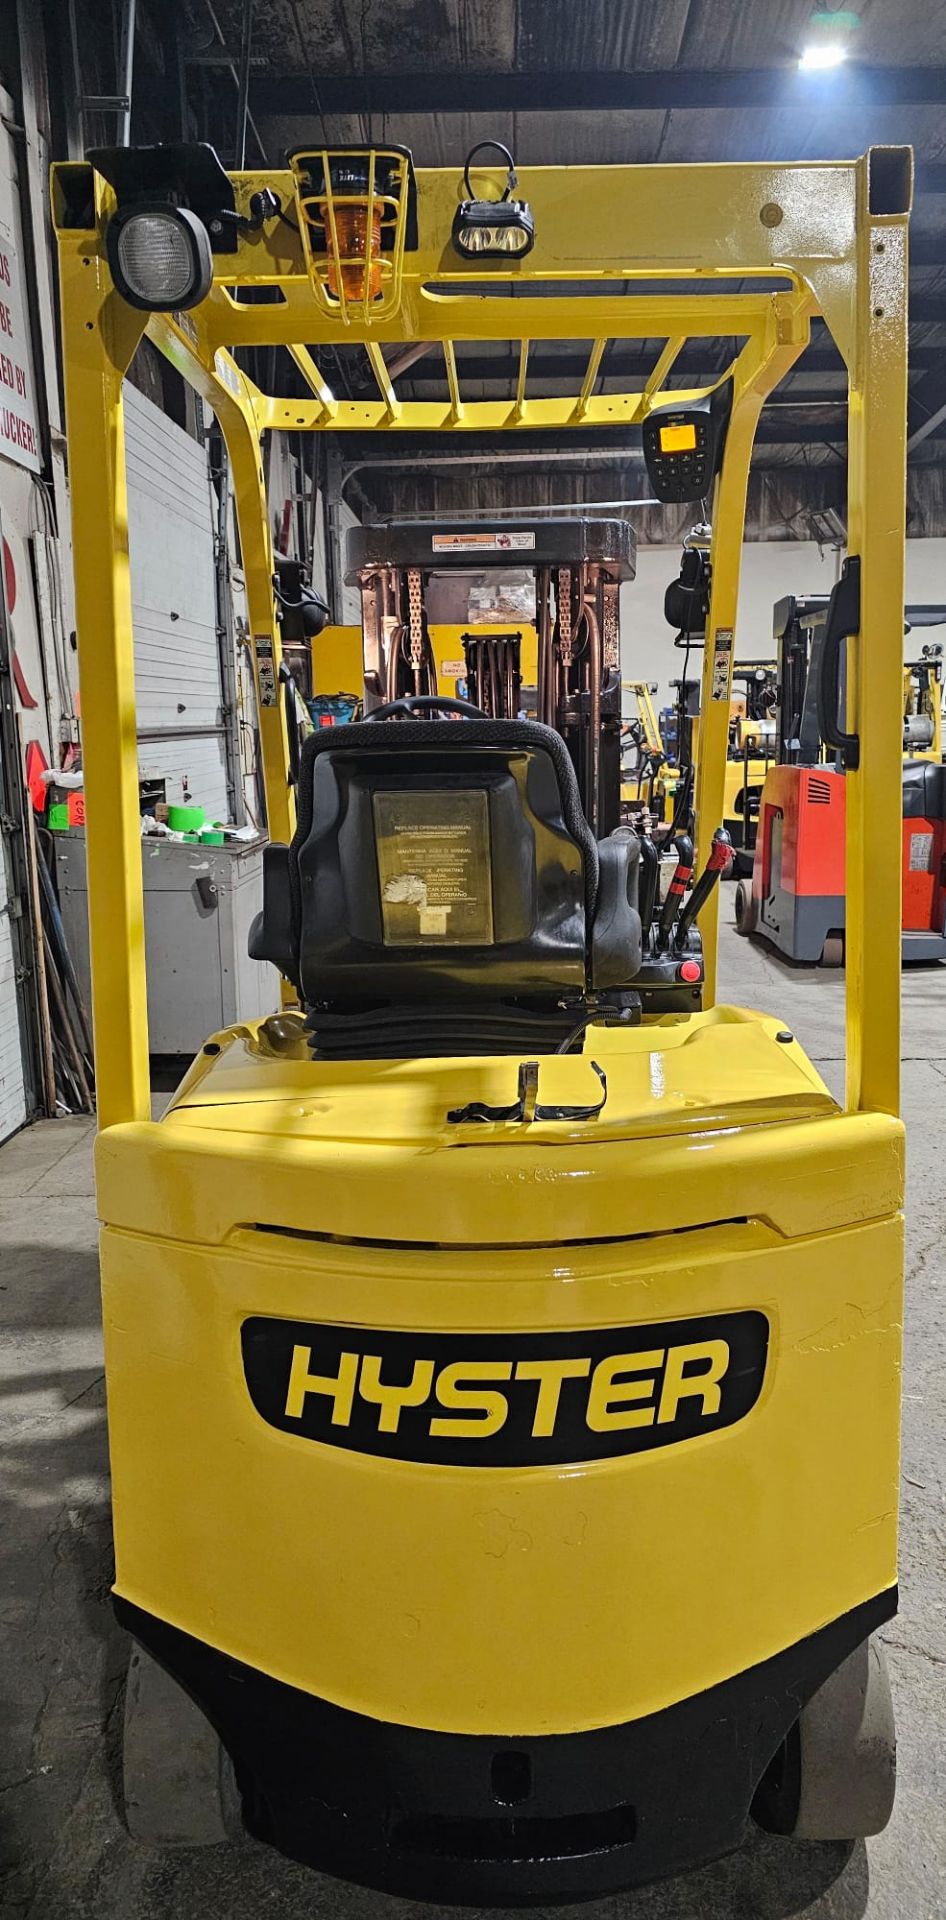 2014 Hyster 5,000lbs Capacity Electric Forklift 48V with sideshift 3-STAGE MAST 189" load height - Image 6 of 8